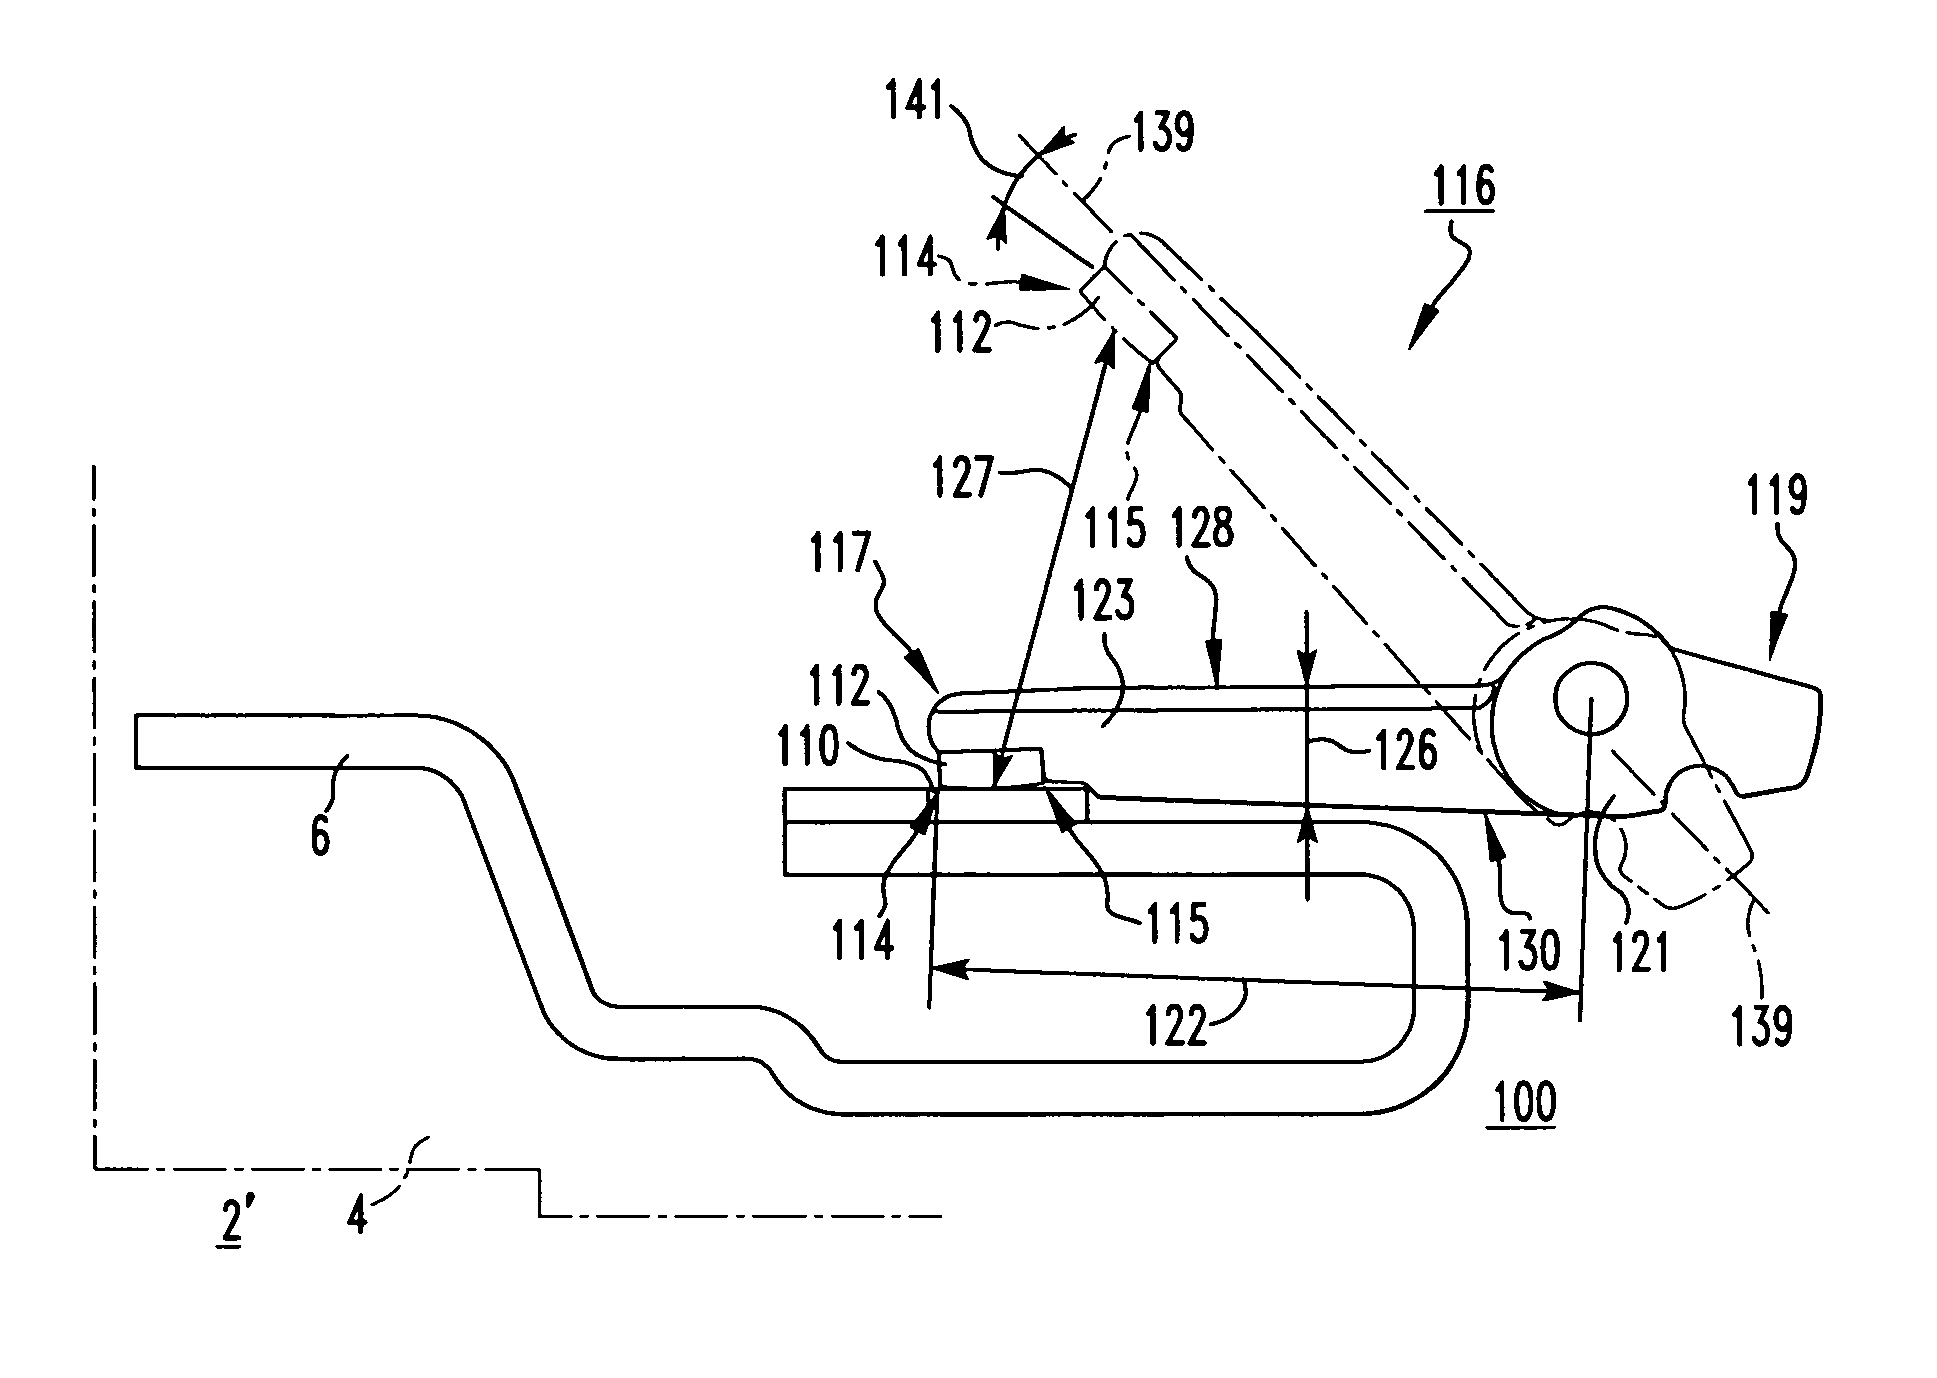 Electrical switching apparatus contact assembly and movable contact arm therefor